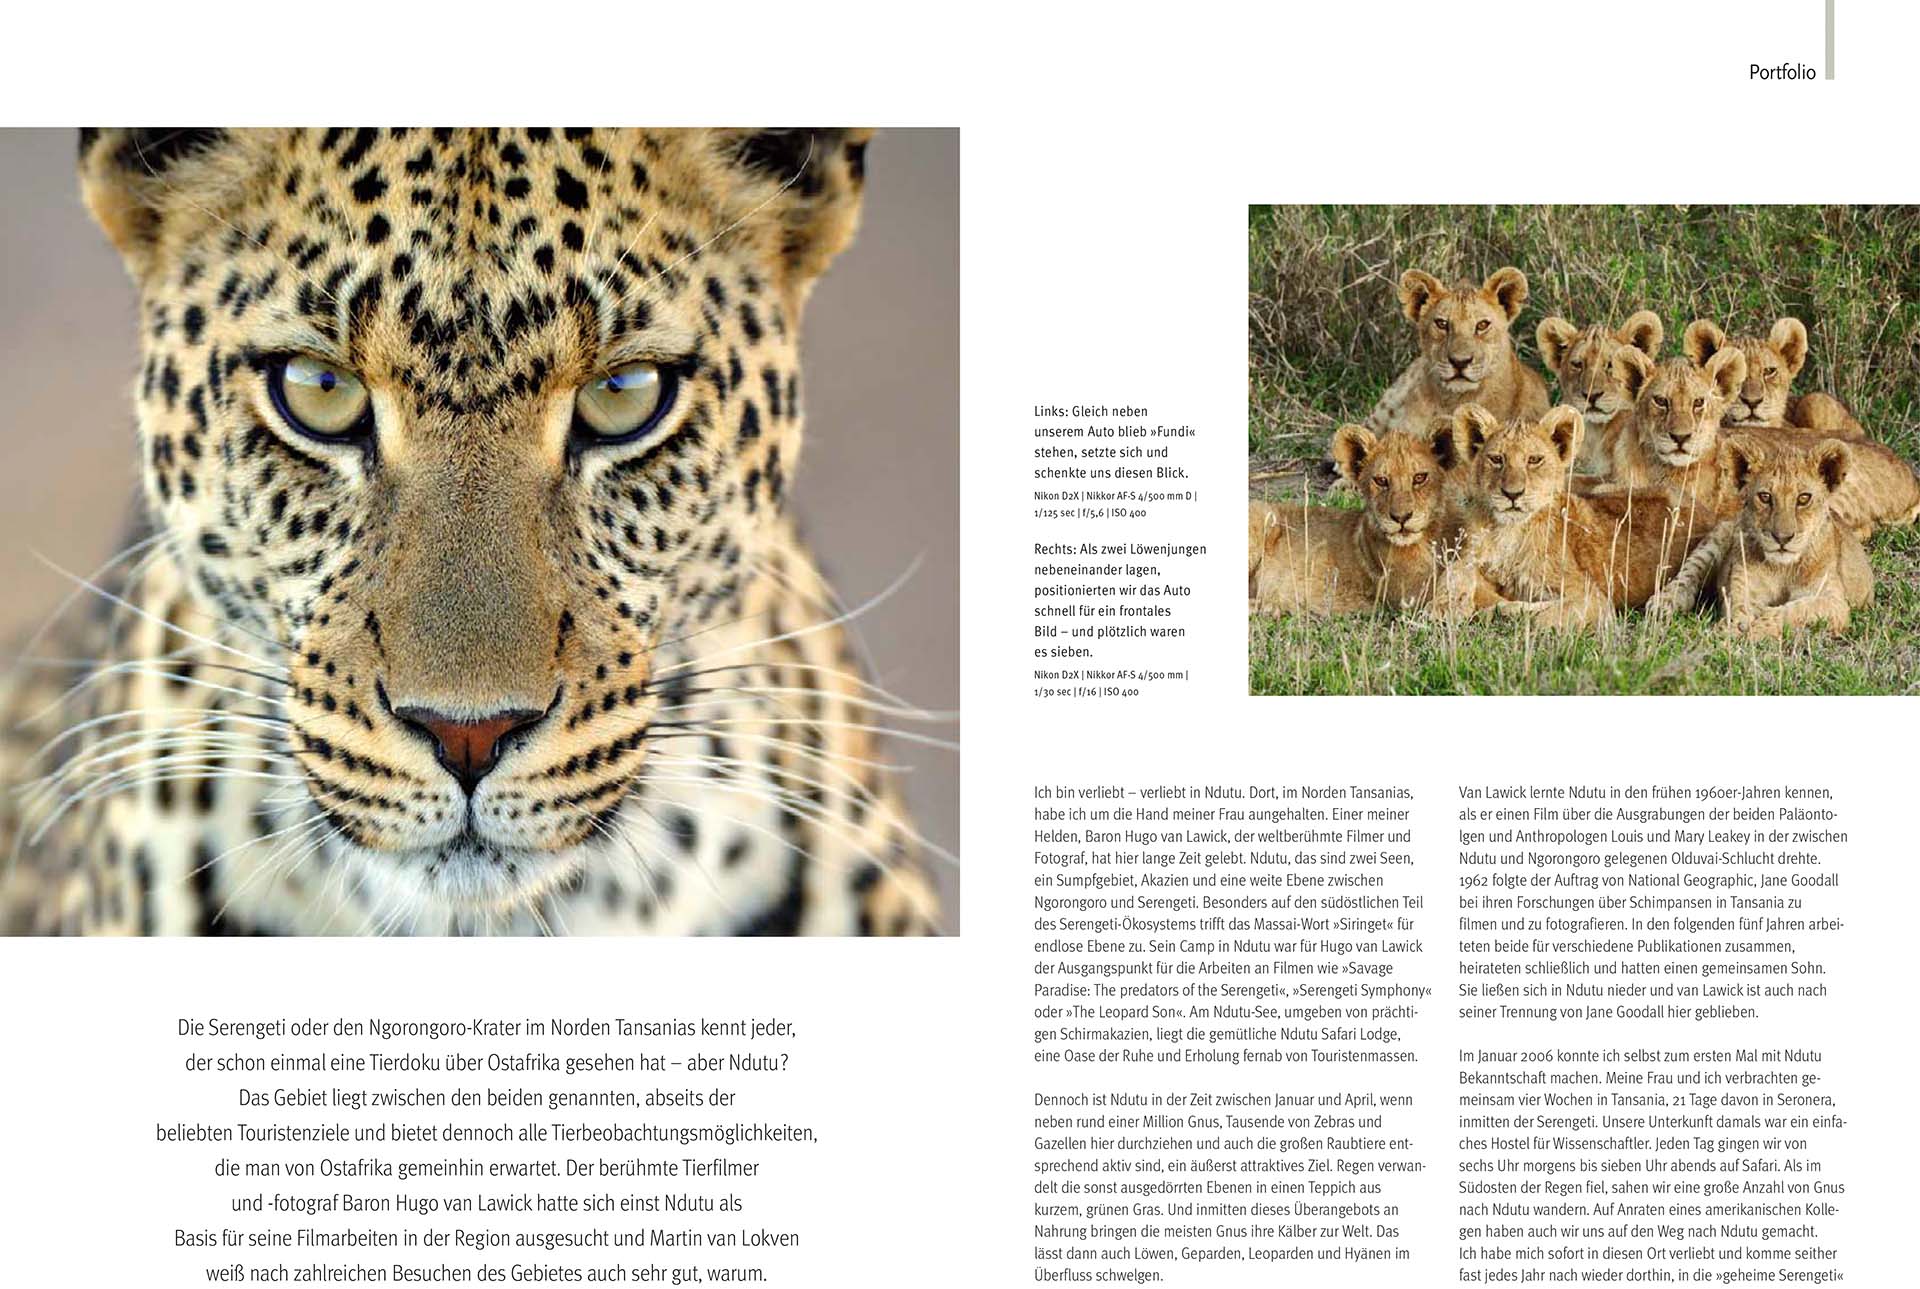 Ten pages of article about wildlife of Ndutu in the German magazine NaturFoto.